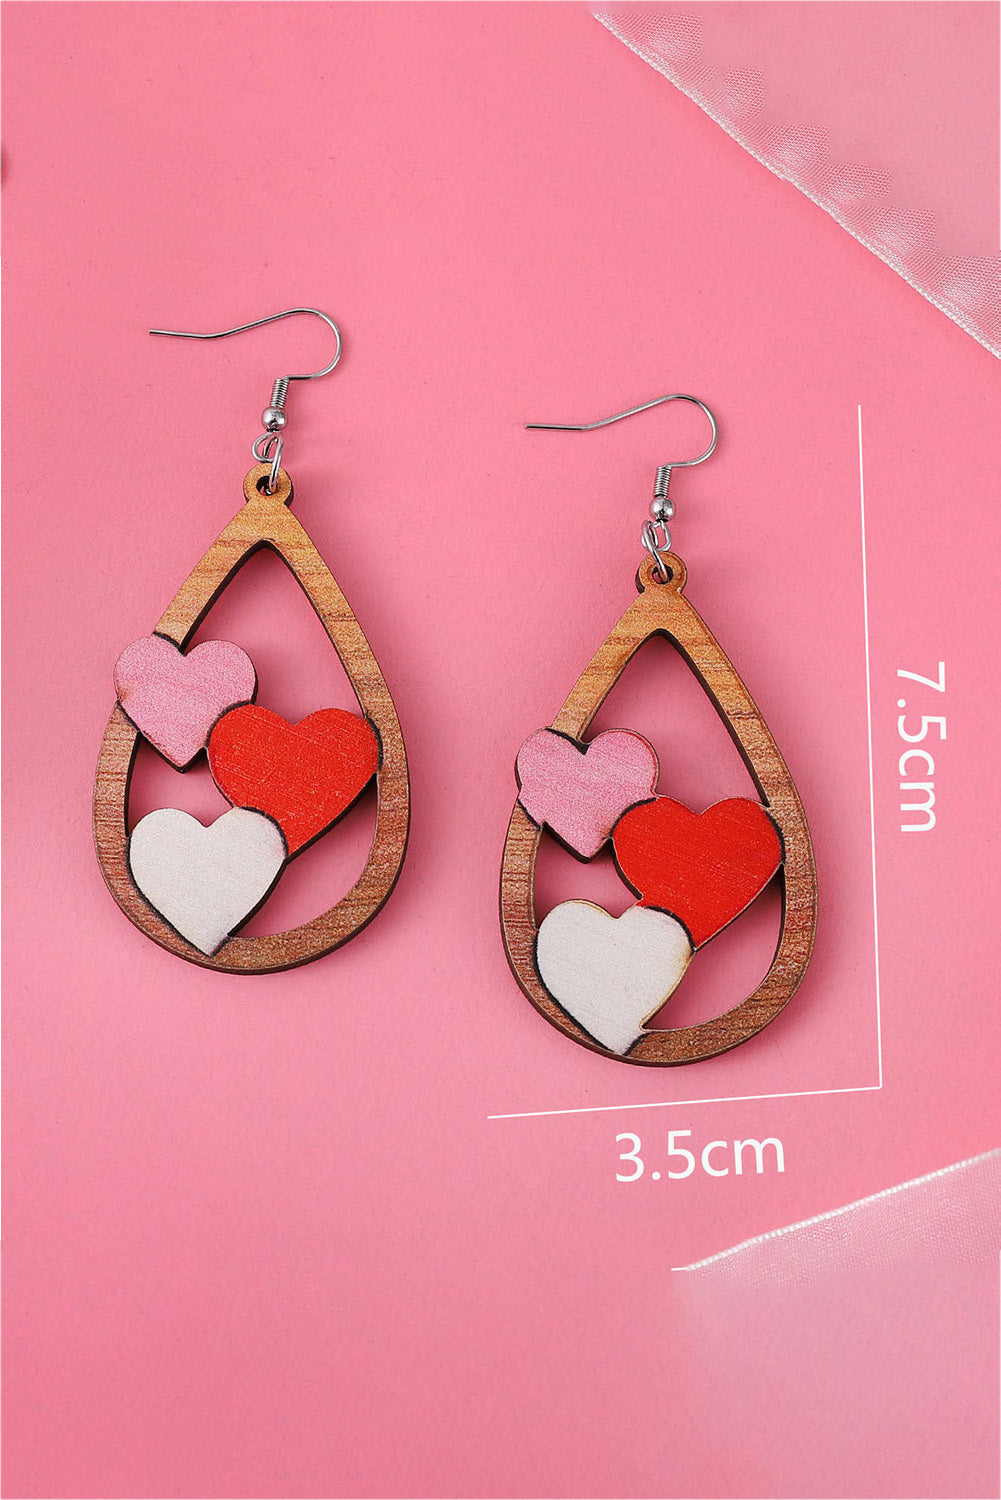 Red Valentines 3 Hearts Insert Water Drop Earrings - Earrings at TFC&H Co.